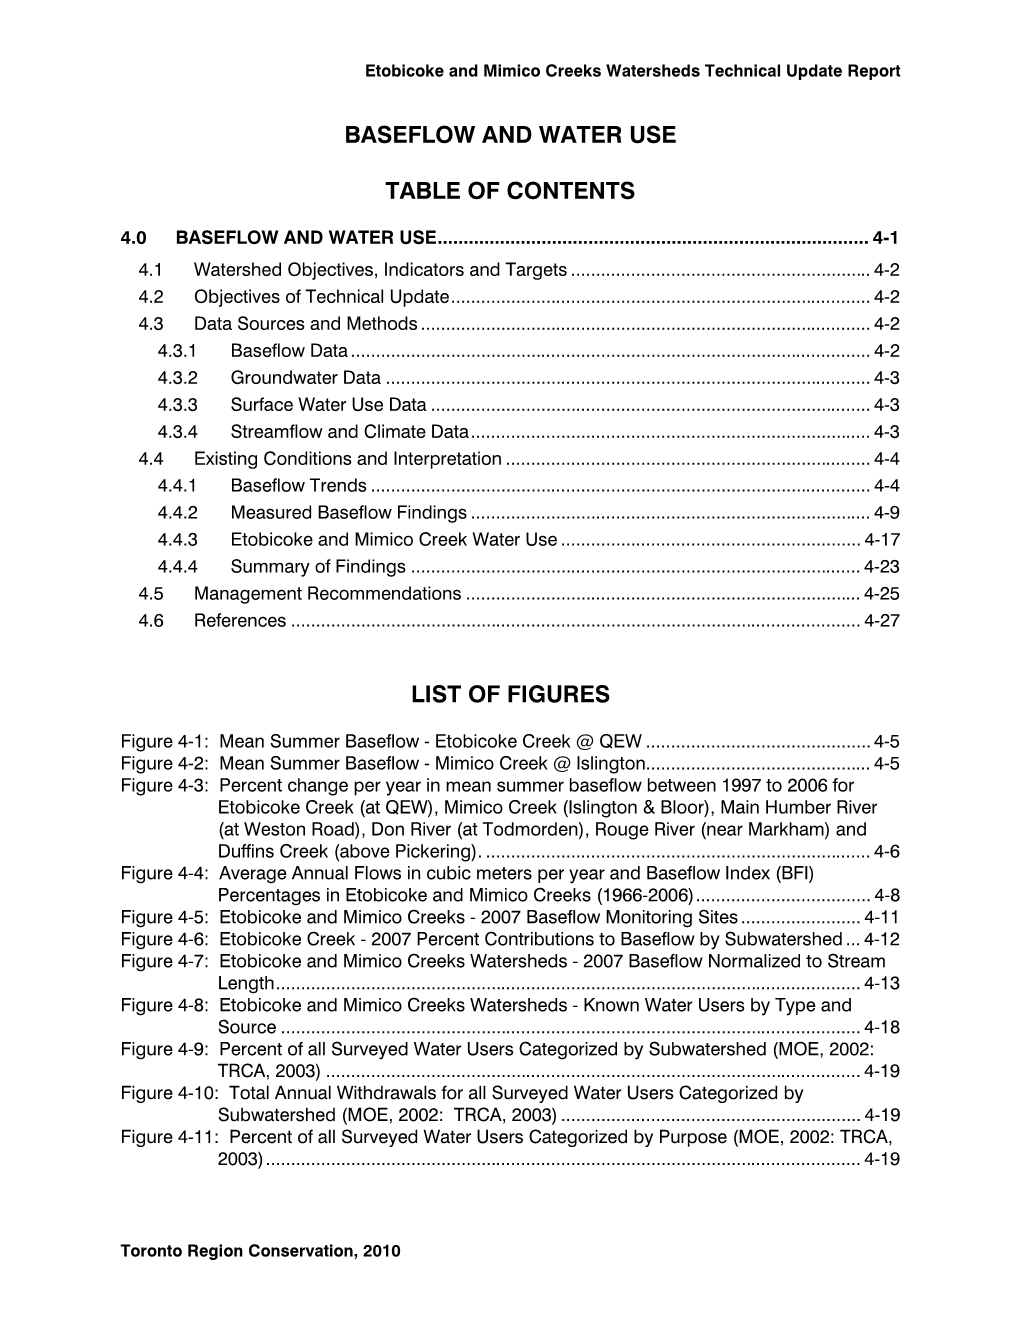 Baseflow and Water Use Table of Contents List Of